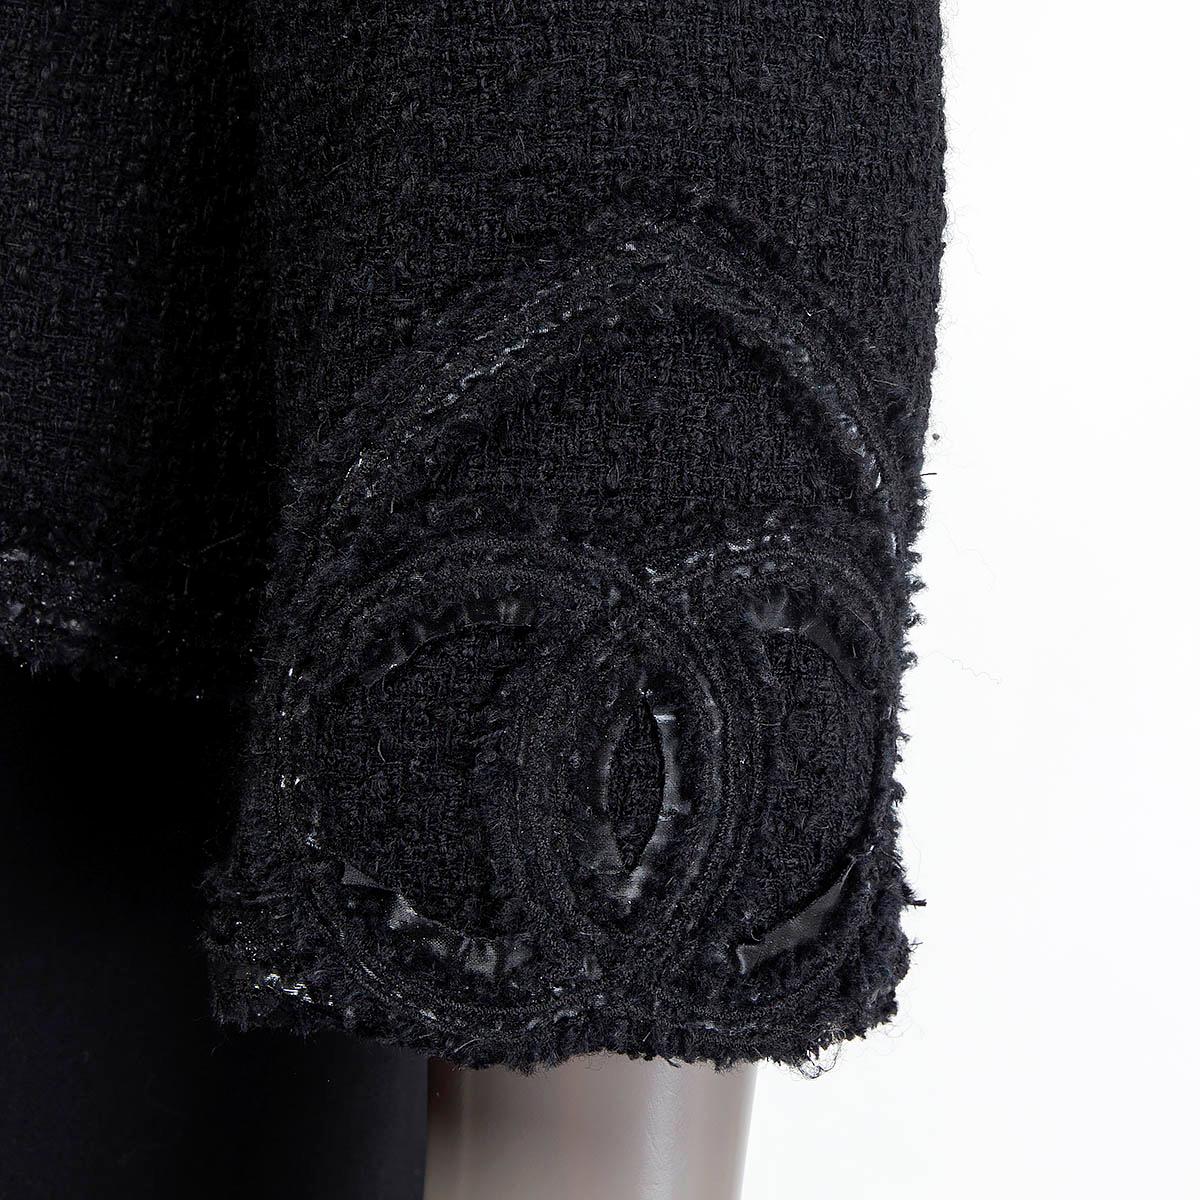 100% authentic Chanel Cruise 2009 fantasy tweed jacket in black wool (99%) and nylon (1%). Features 'CC' hearts at the cuffs and two sewn shut slit pockets on the front. Has a signature weight chain around the inside of the hemline. Opens with one